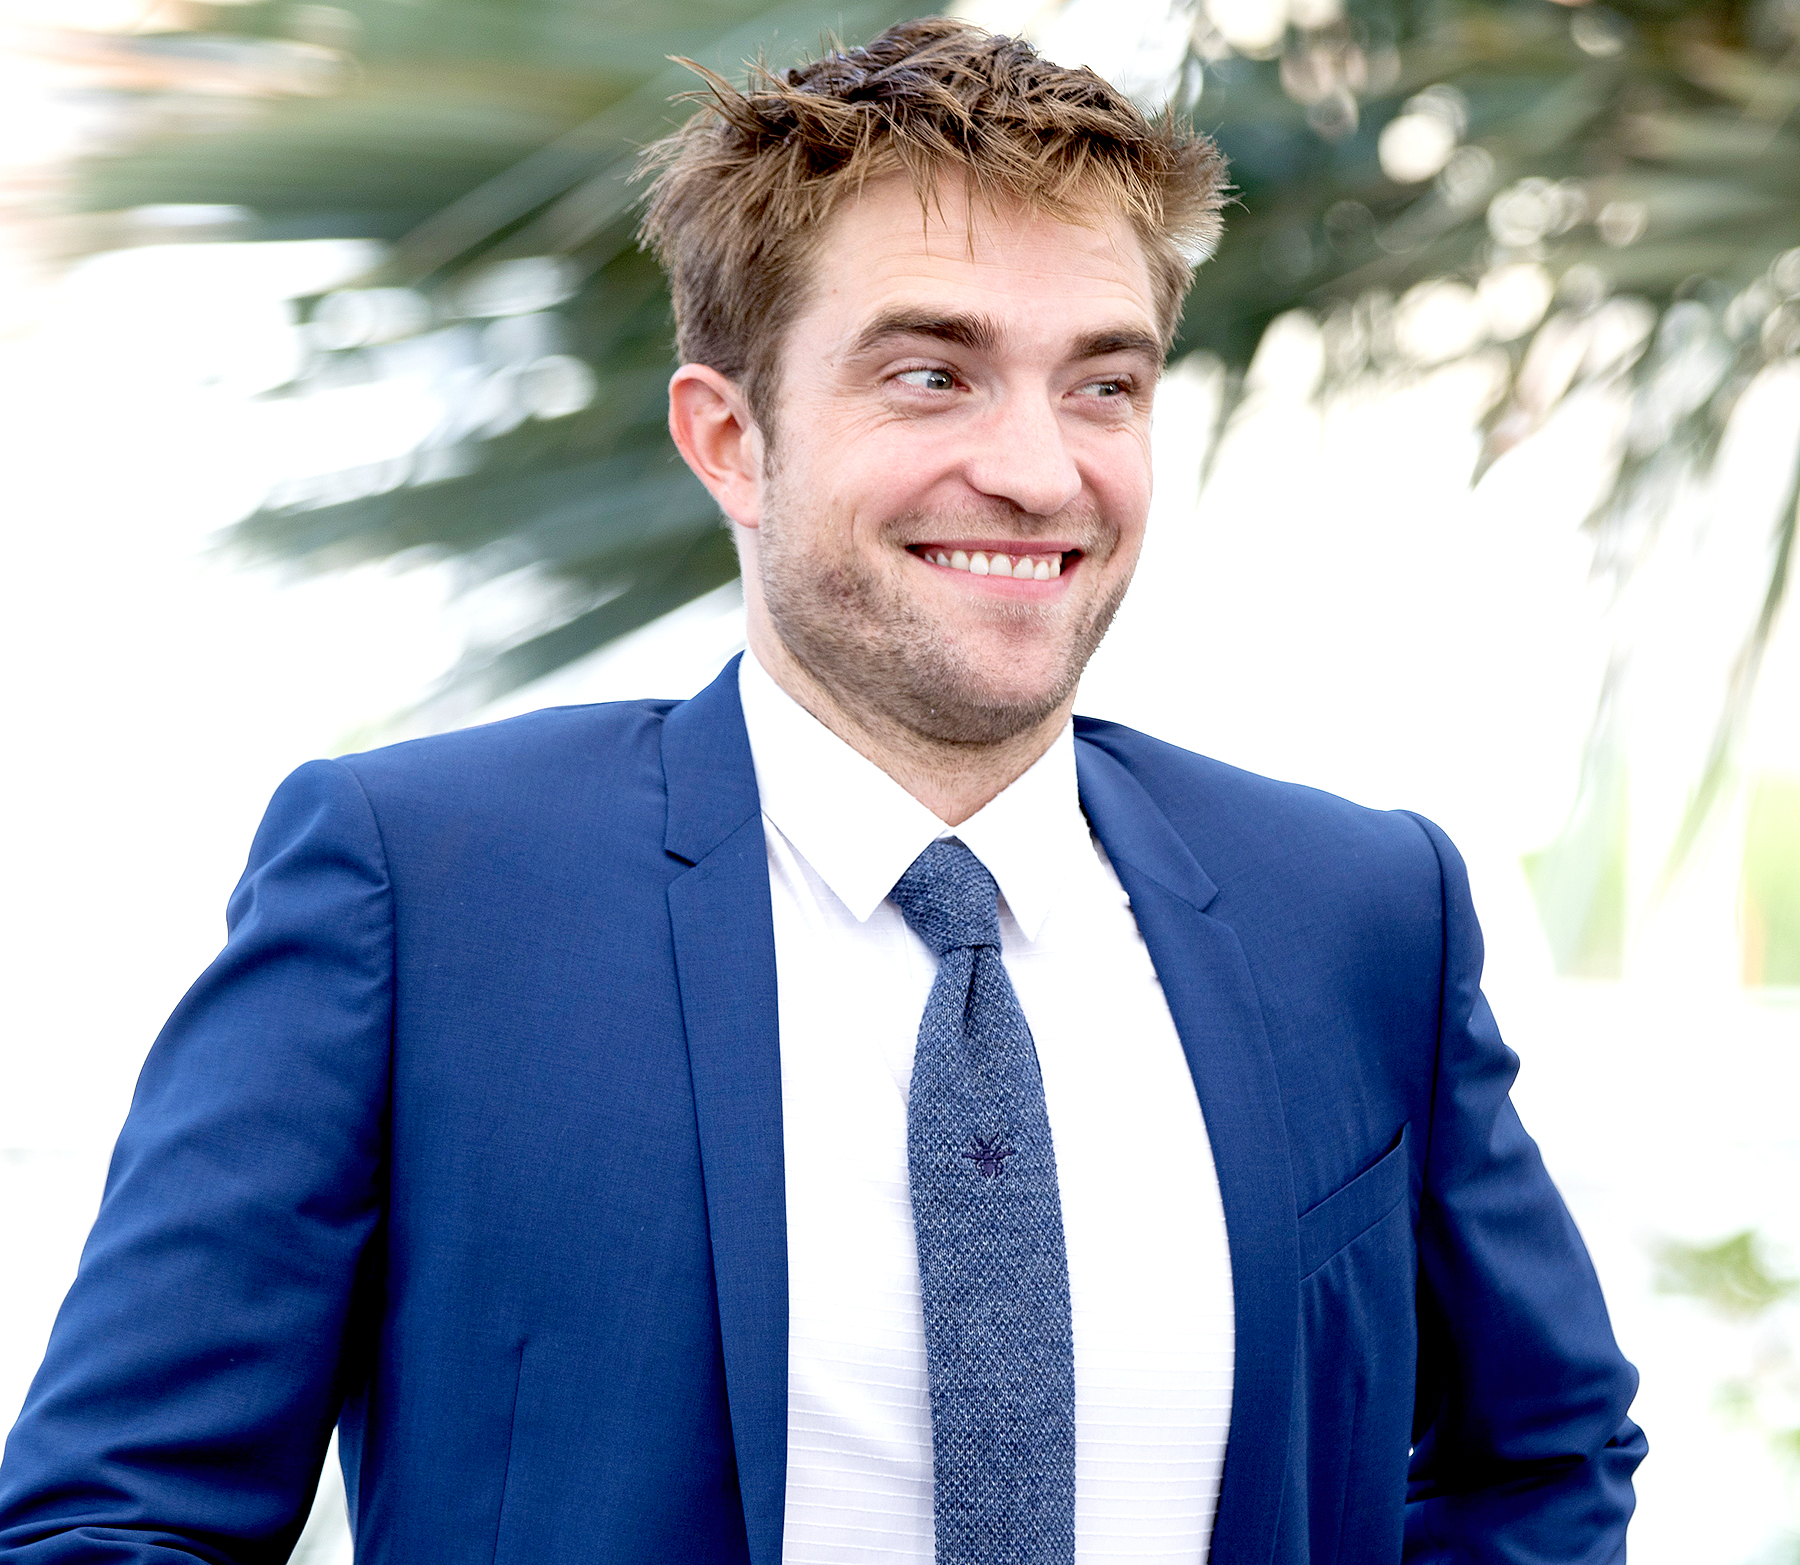 Robert Pattinson Reveals He Was Almost Fired From 'Twilight'